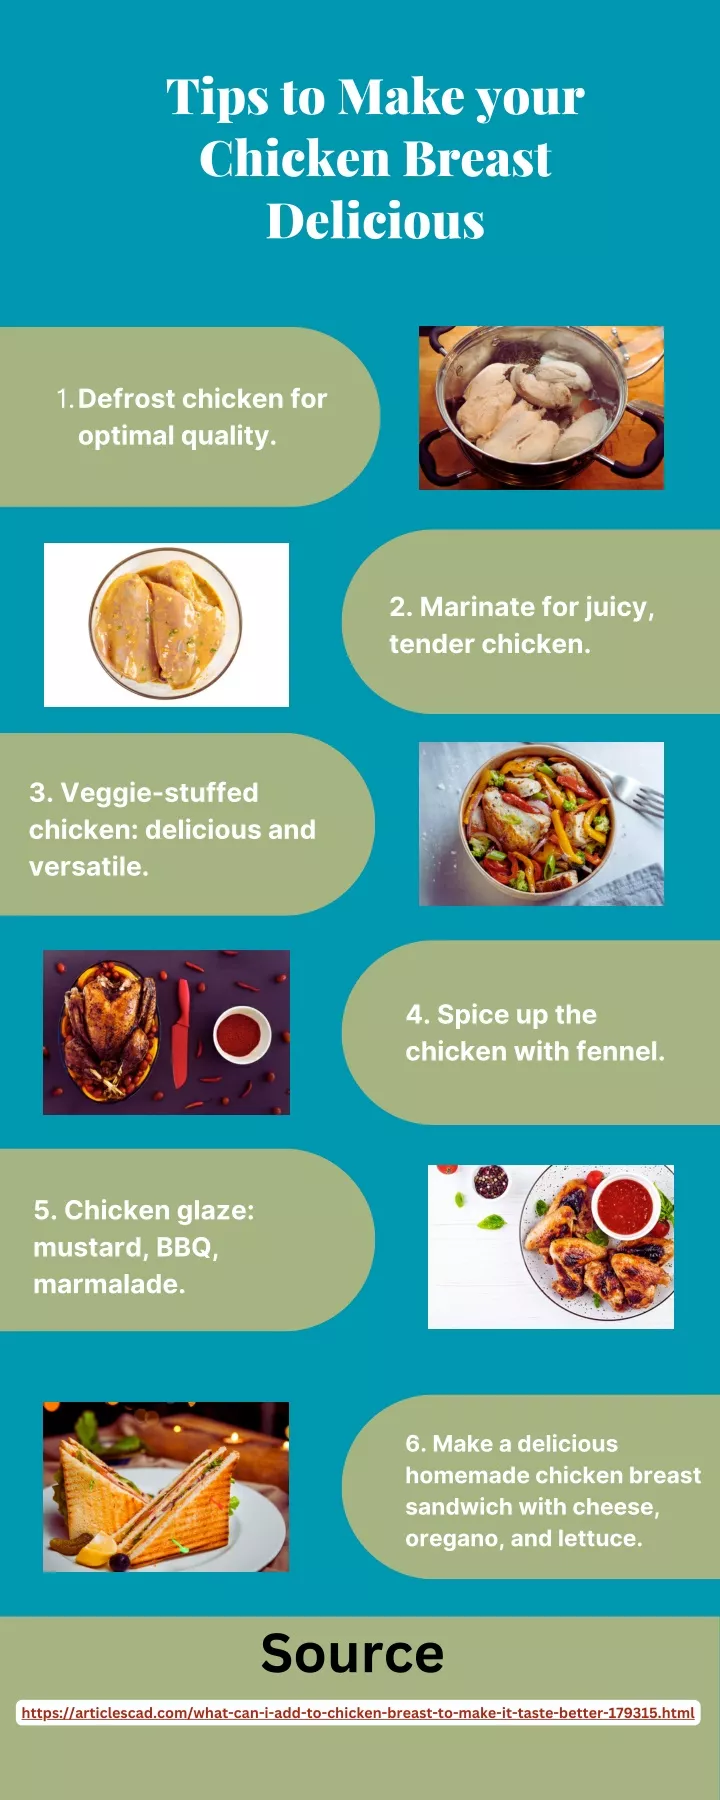 tips to make your chicken breast delicious